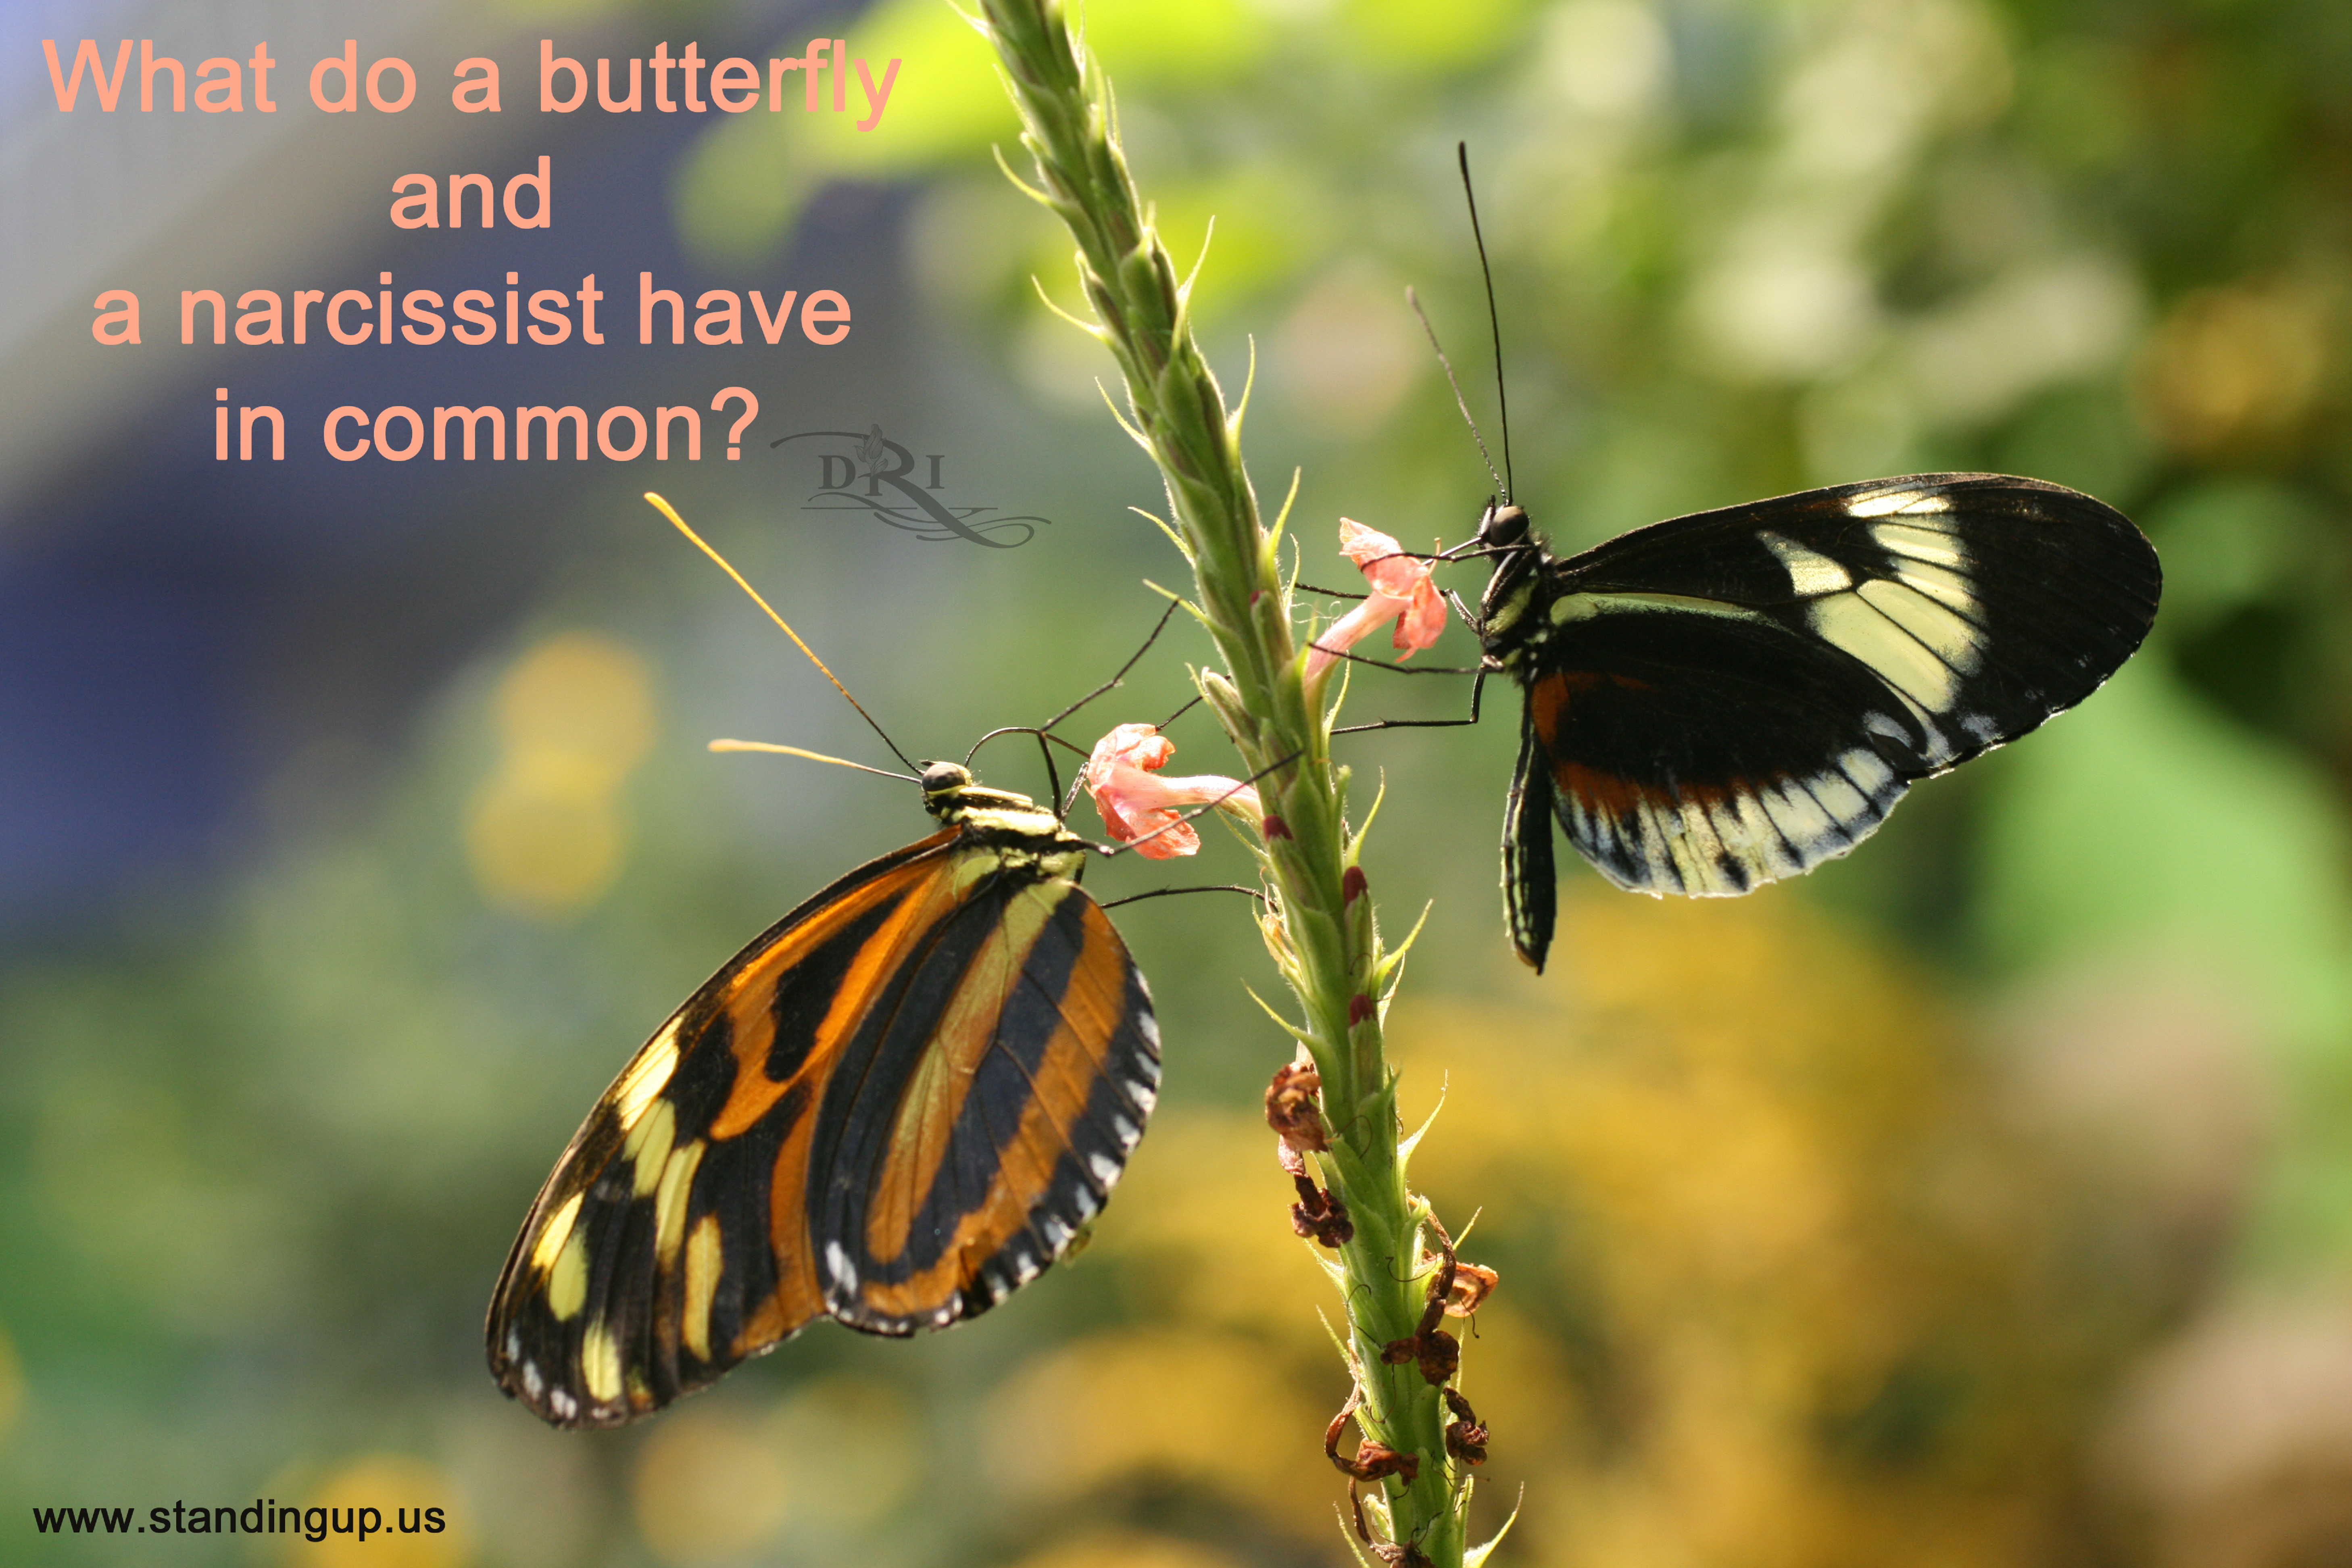 What Do a Butterfly and a Nacissist have in Common? | diana iannarone